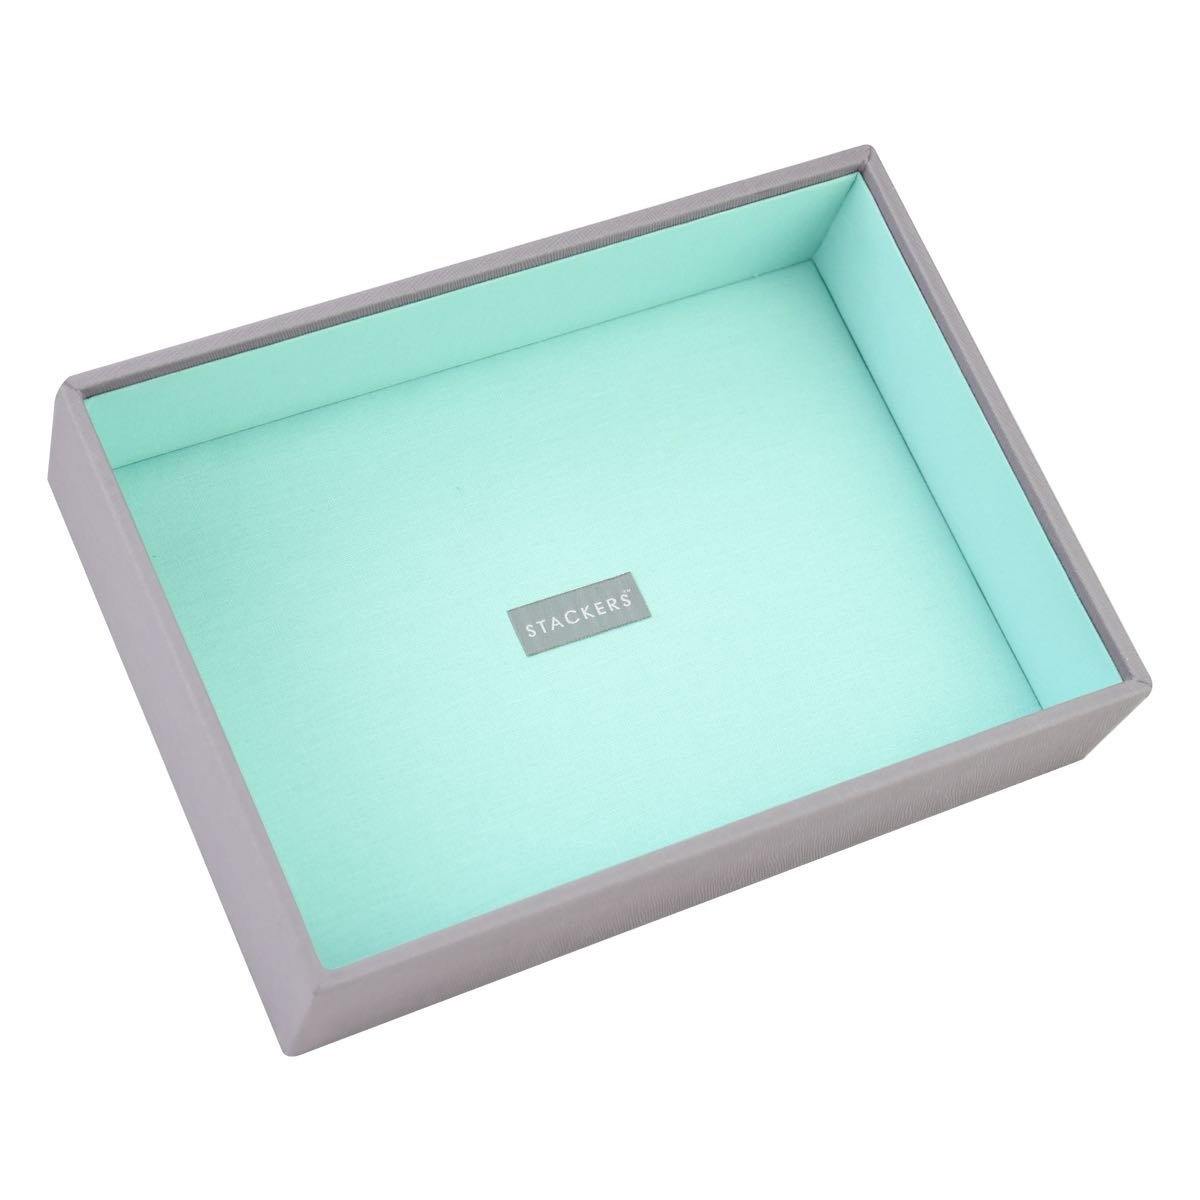 Dove Grey with Mint lining Classic Size Stackers Jewellery Box Deep compartment tray